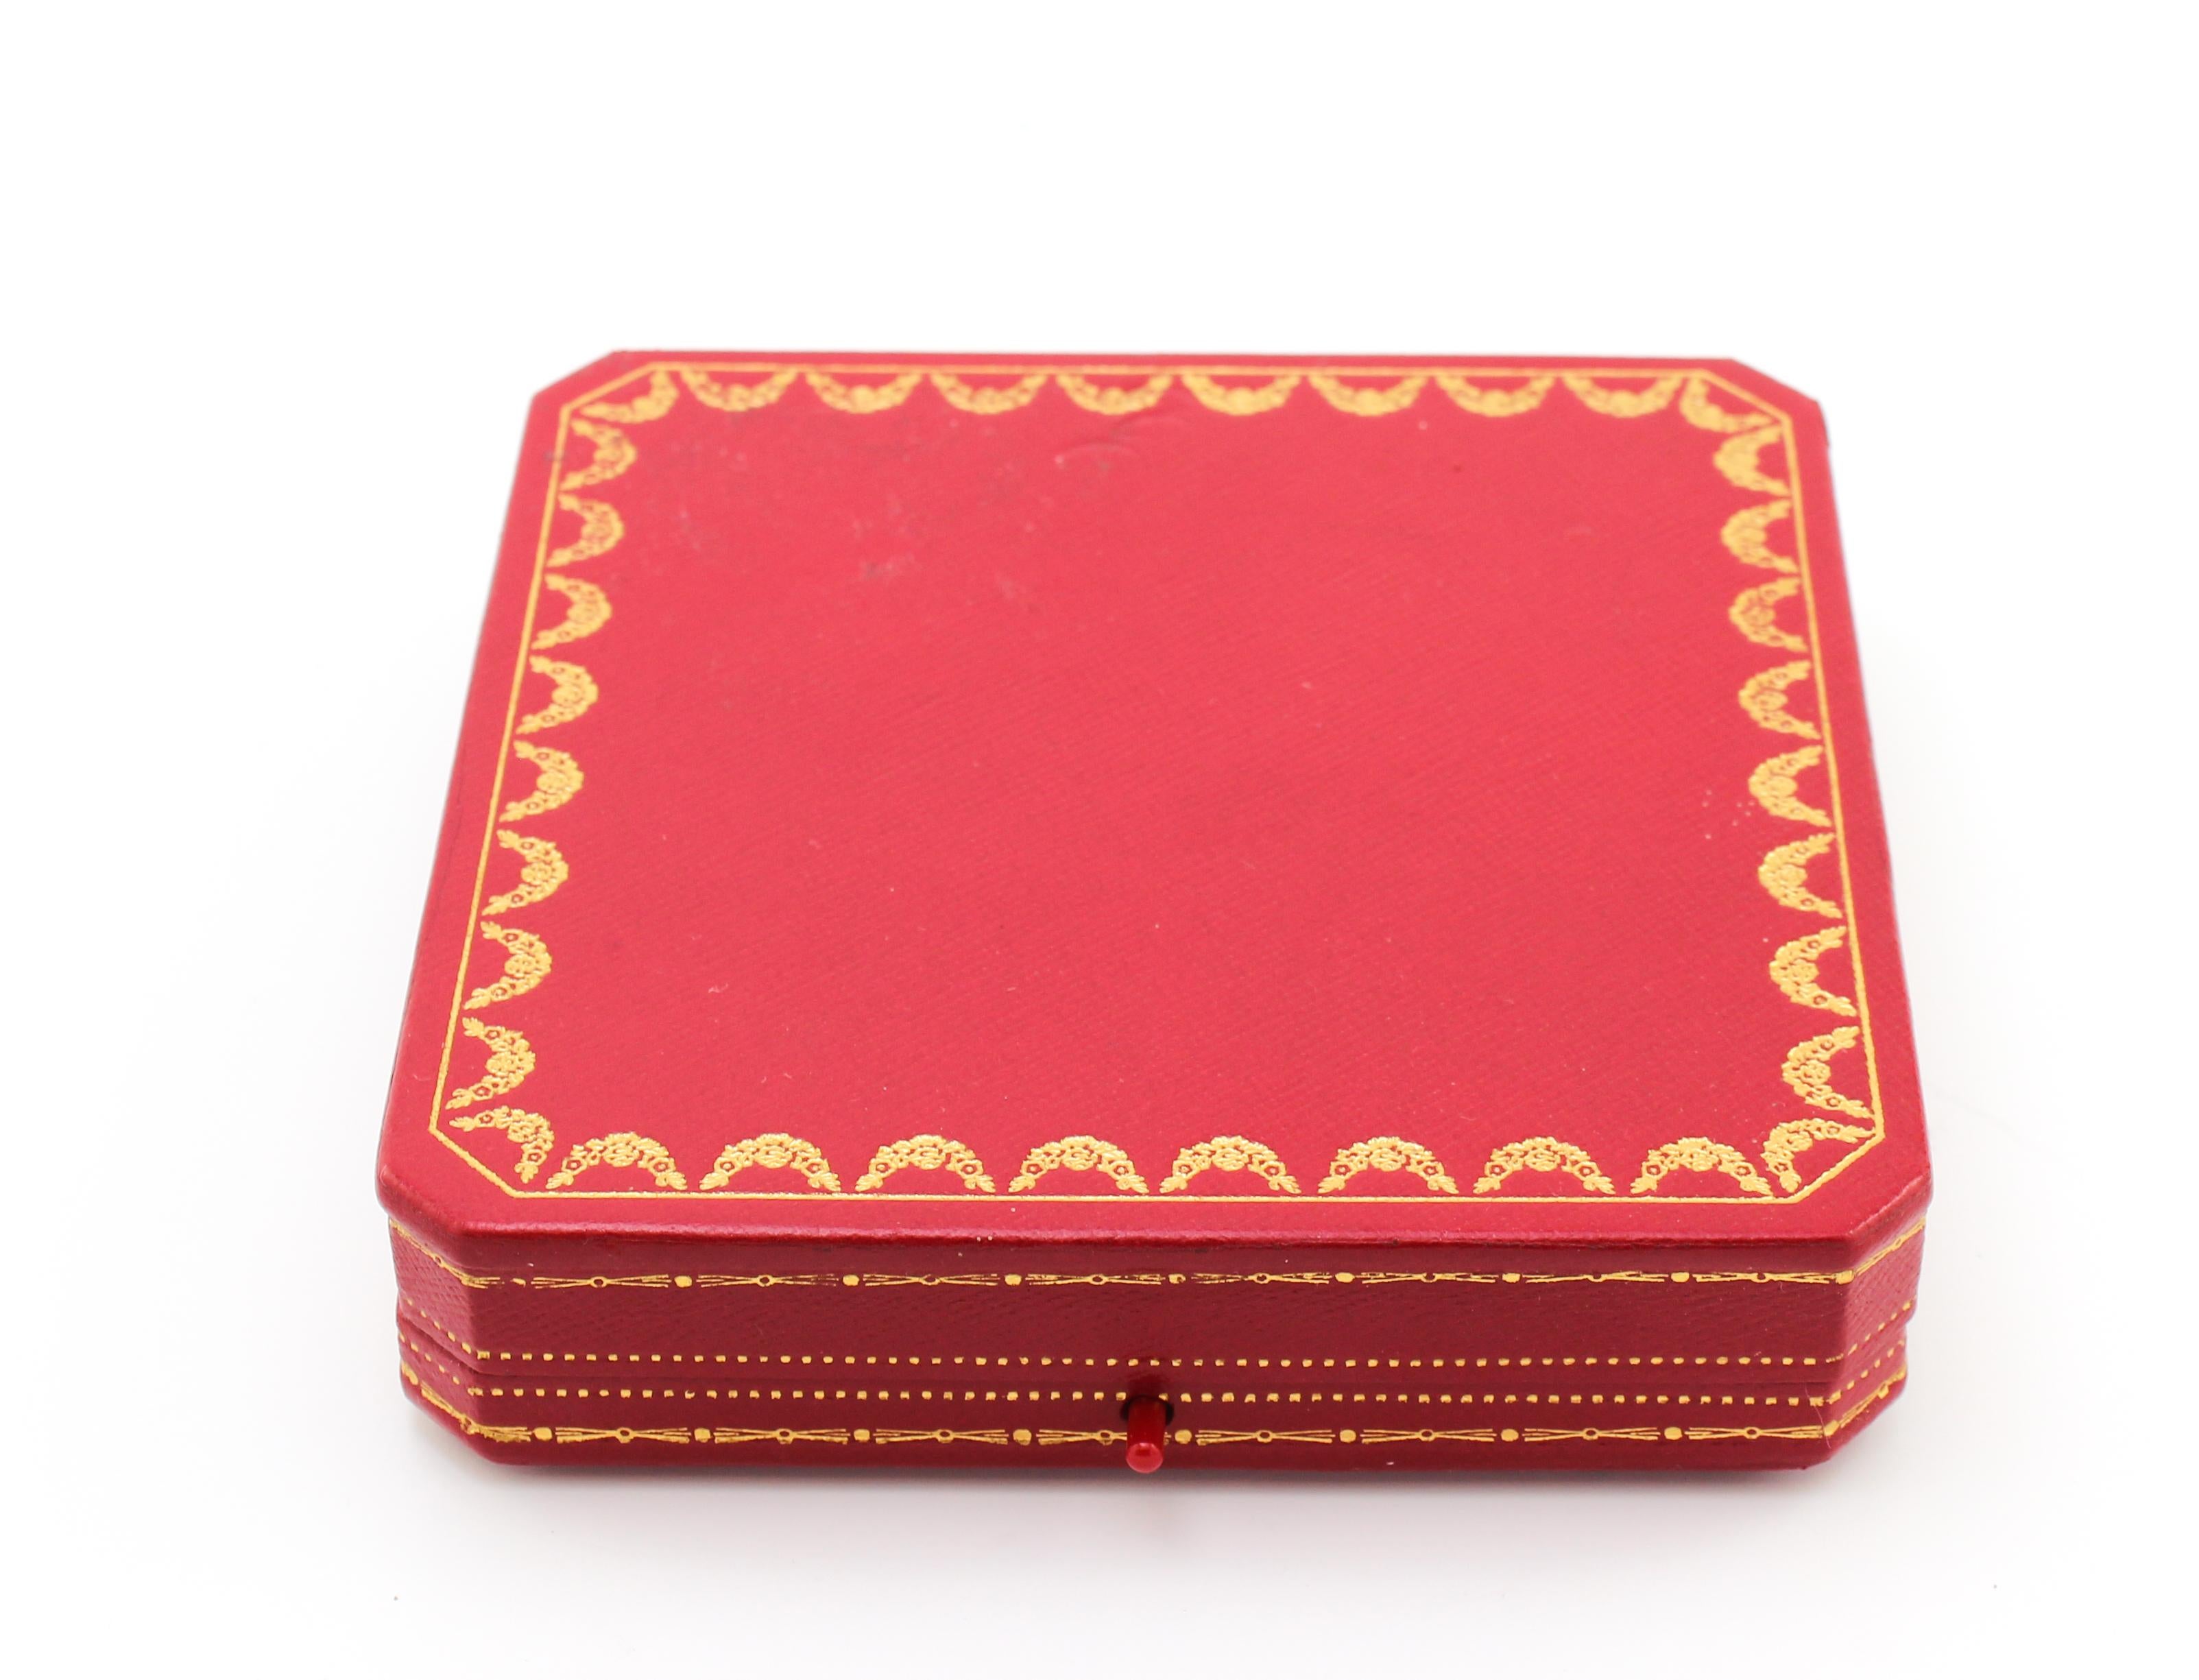 Vintage Cartier jewellery, or case box, Made in France, Paris, 1970's

Size: 12.2 x 12.2 x 2.7 cm.